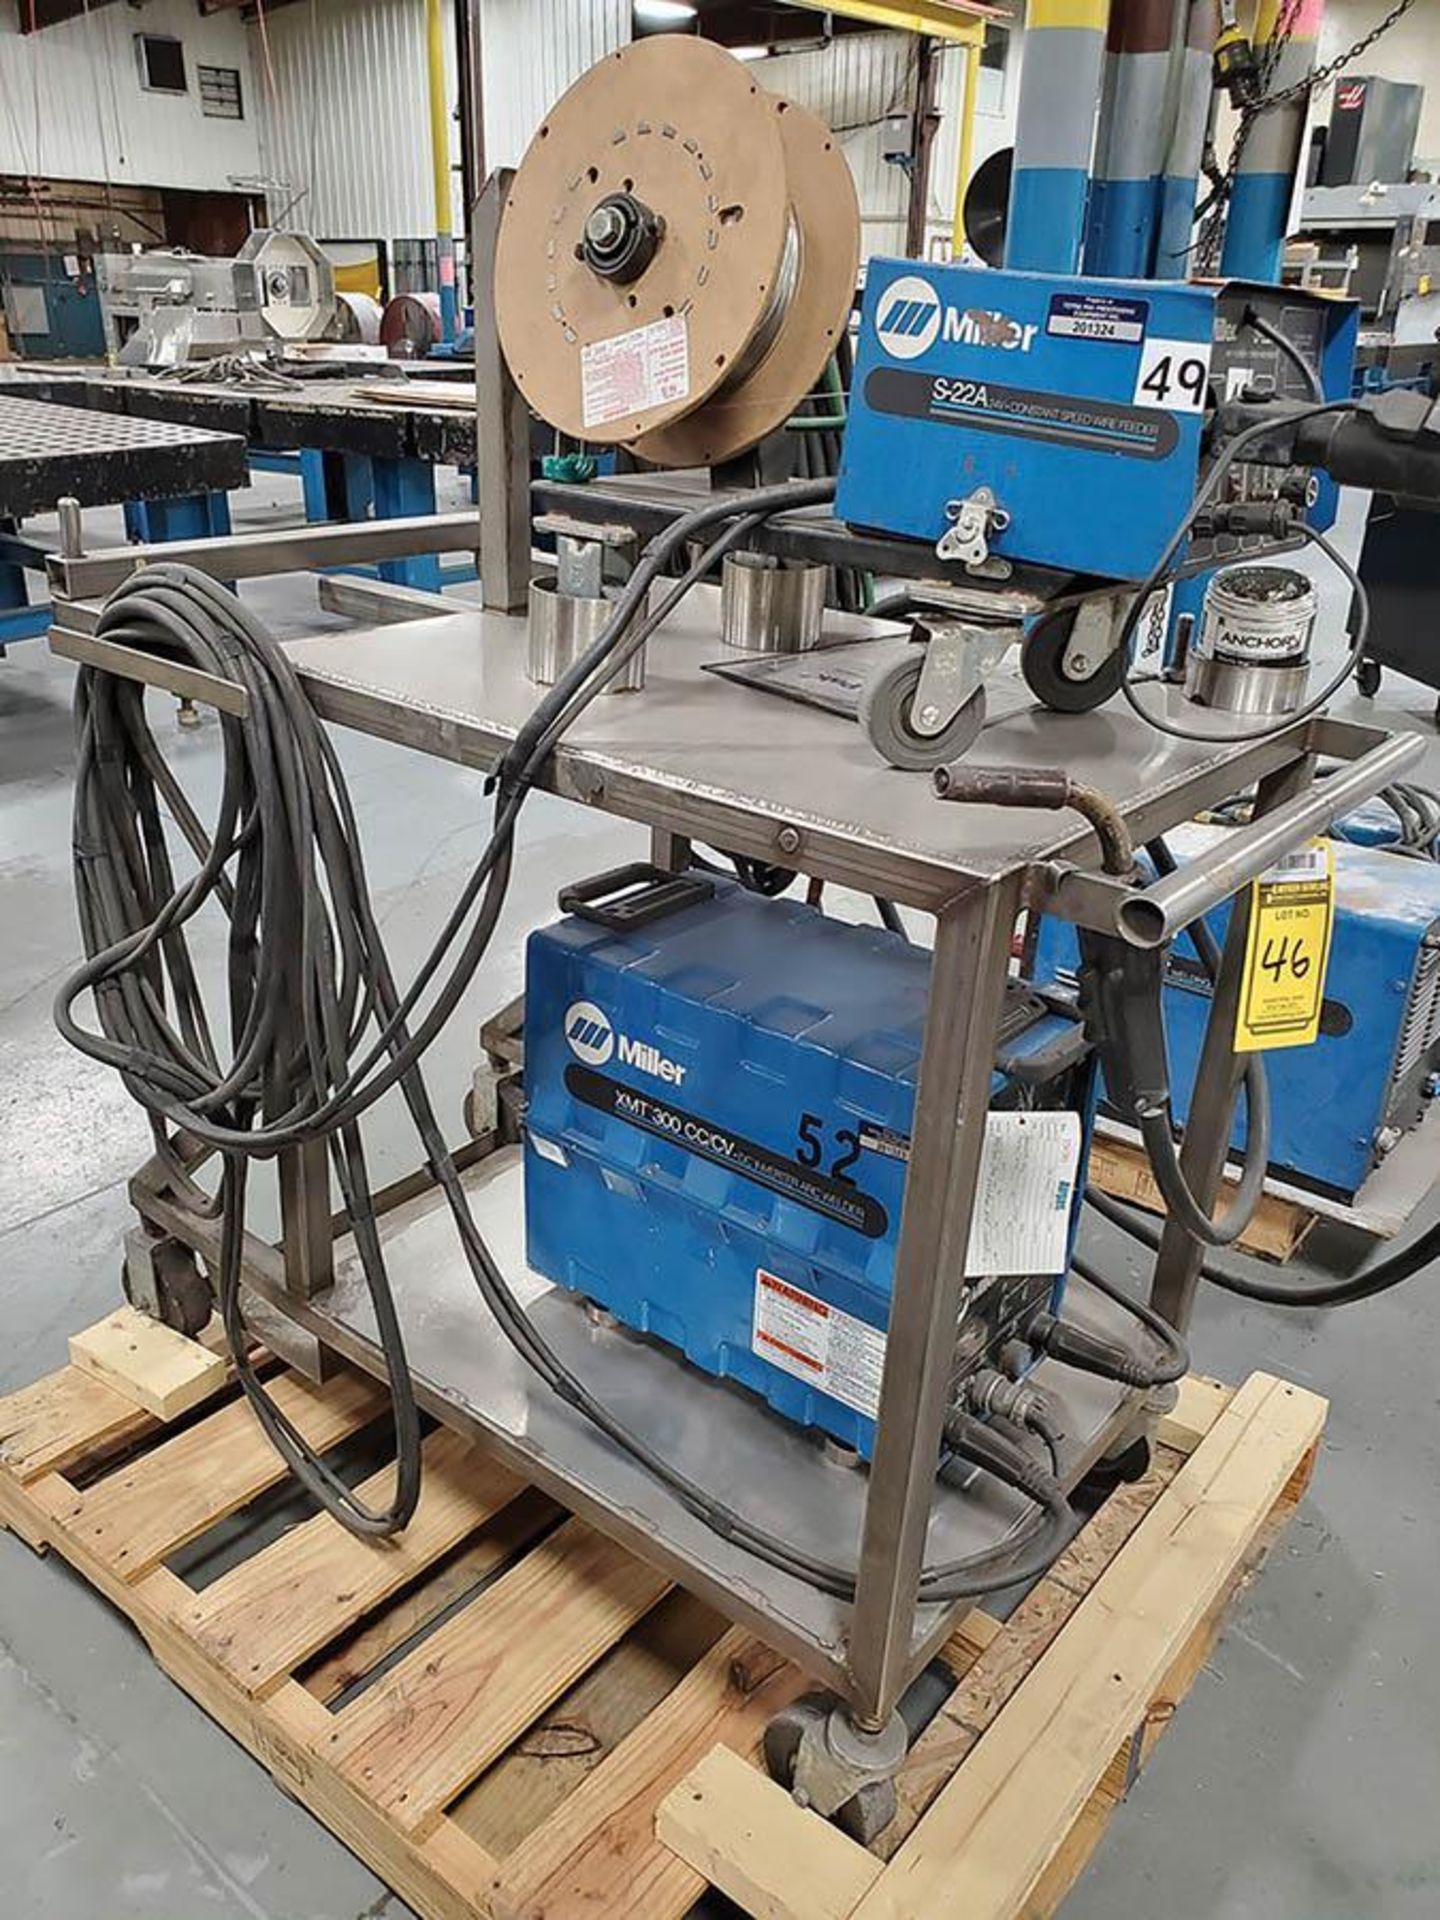 MILLER XMT 300 CC/CV DC INVERTER ARC WELDER ON STAINLESS CART WITH MILLER S-22A 24V CONSTANT WIRE - Image 3 of 5